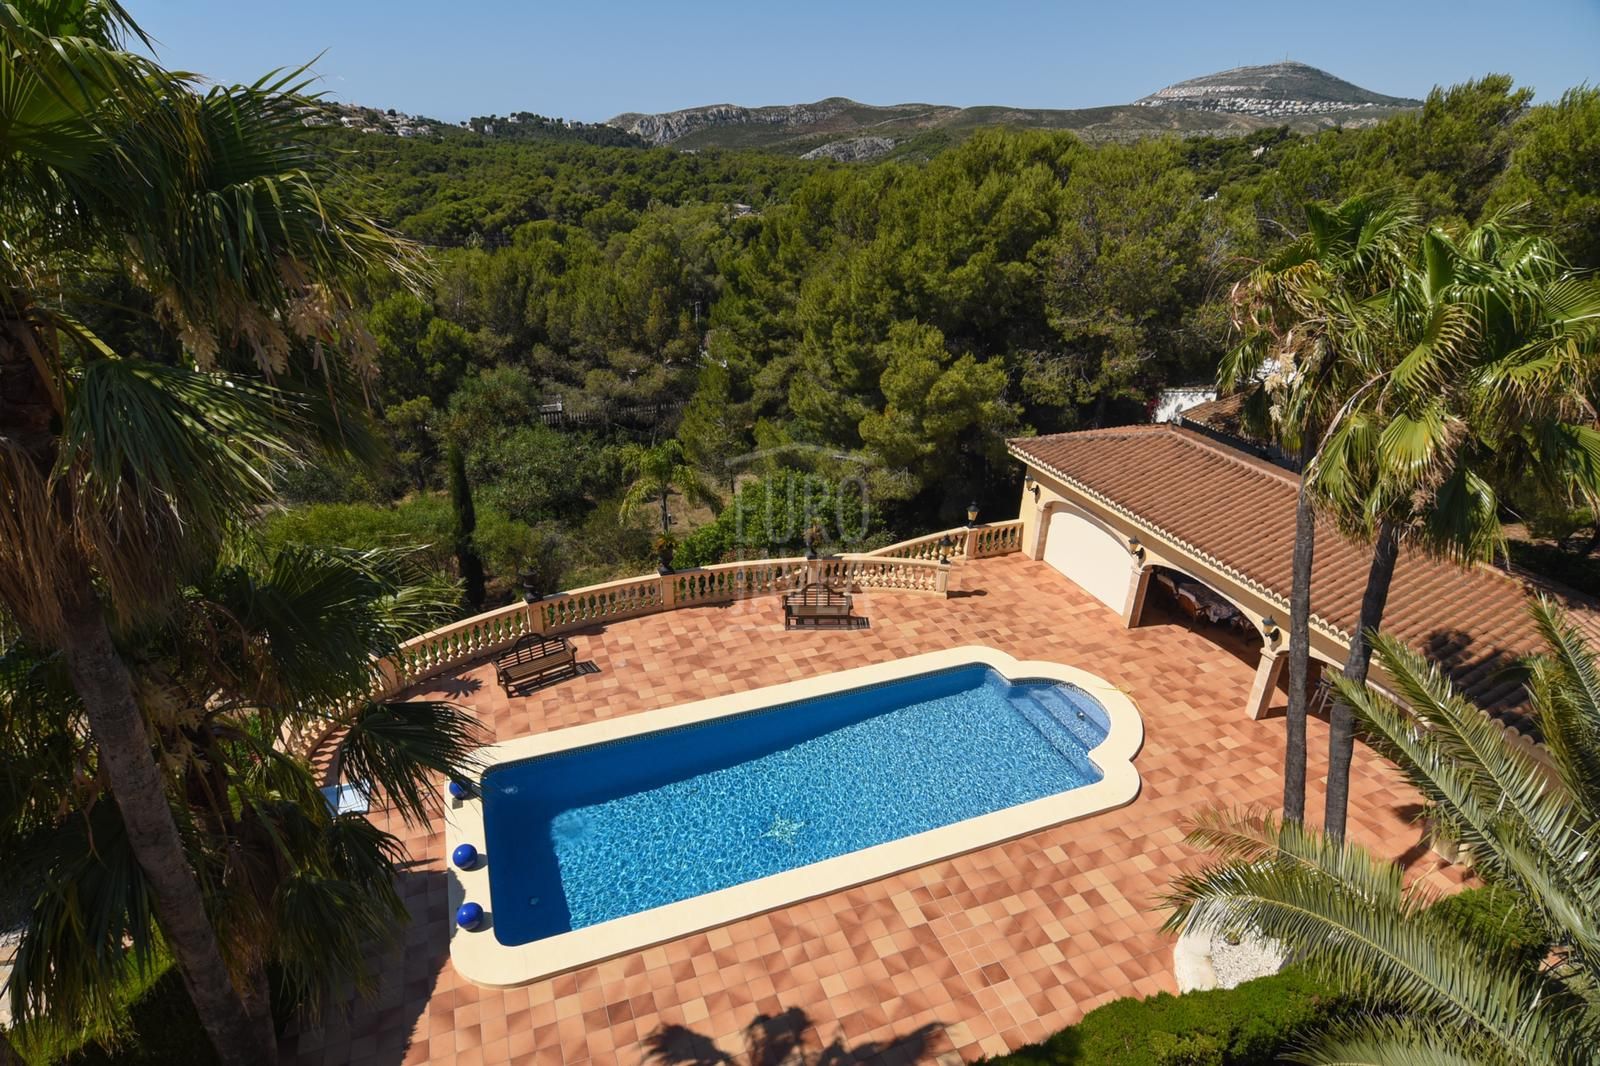 Villa for sale in Jávea in exclusive with open and sea views in a large plot